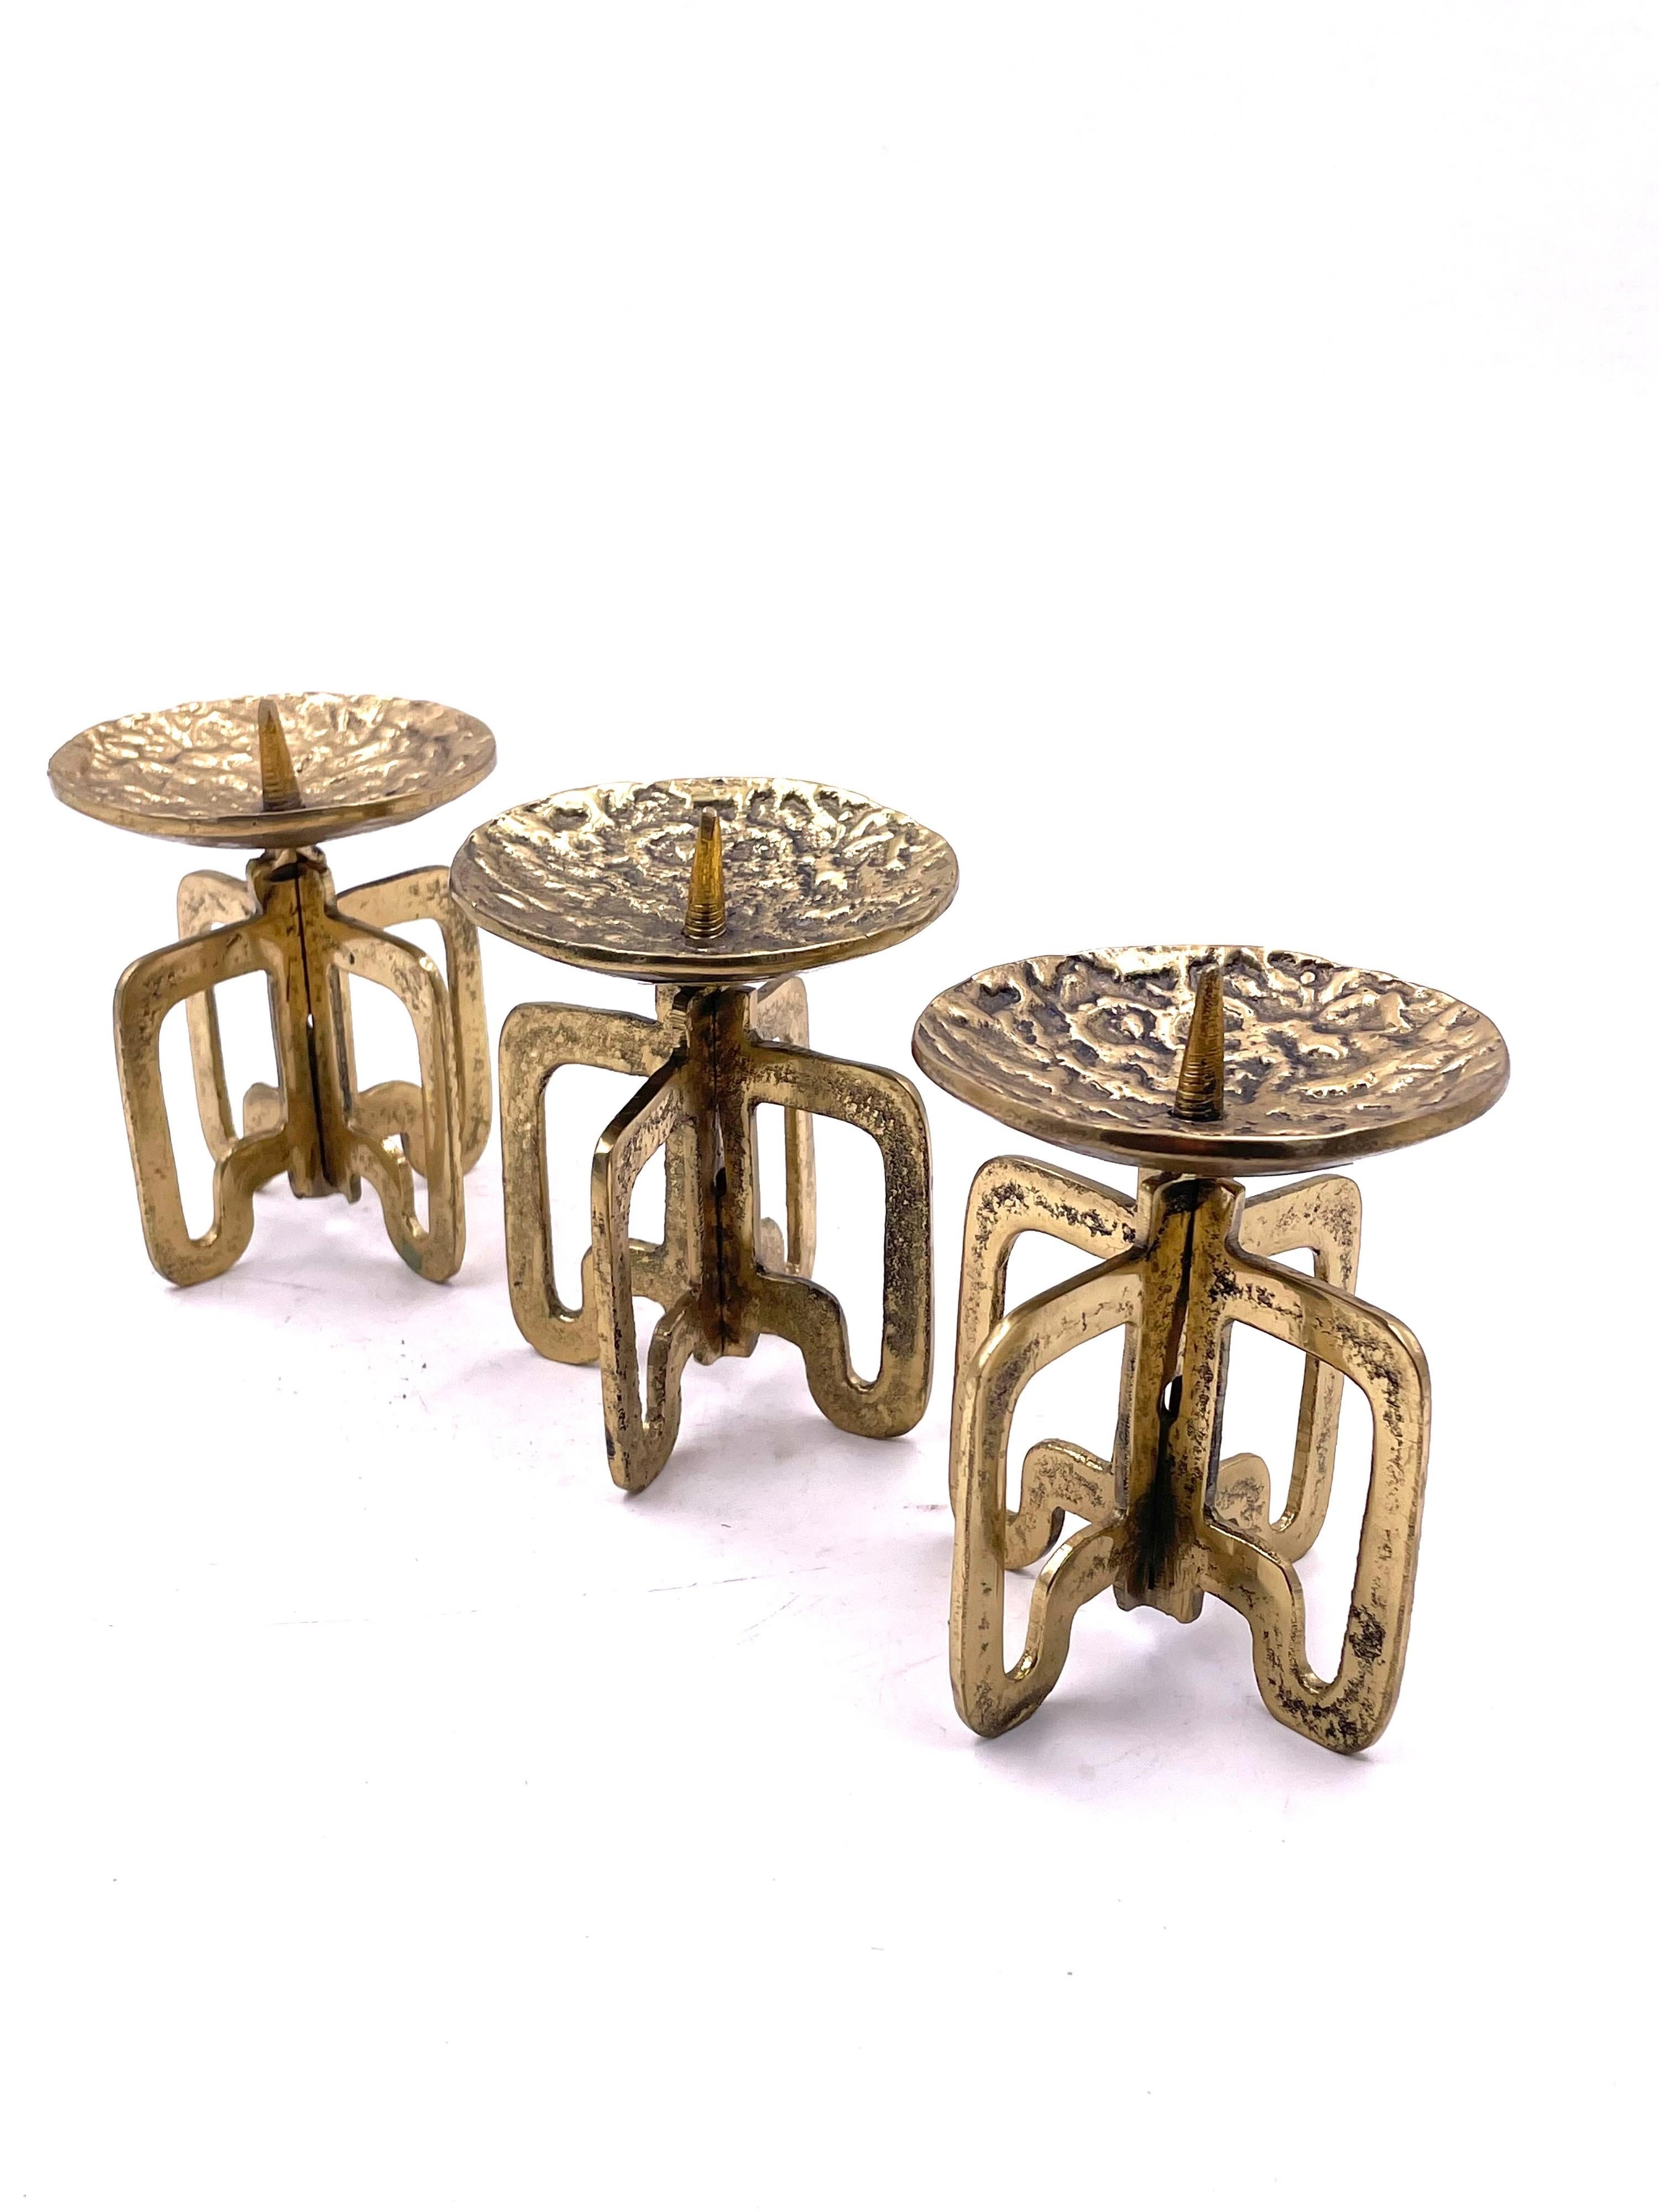 Rare set of 3 candle holders solid hand hammered brass, made in austria beautiful and unique retains label.